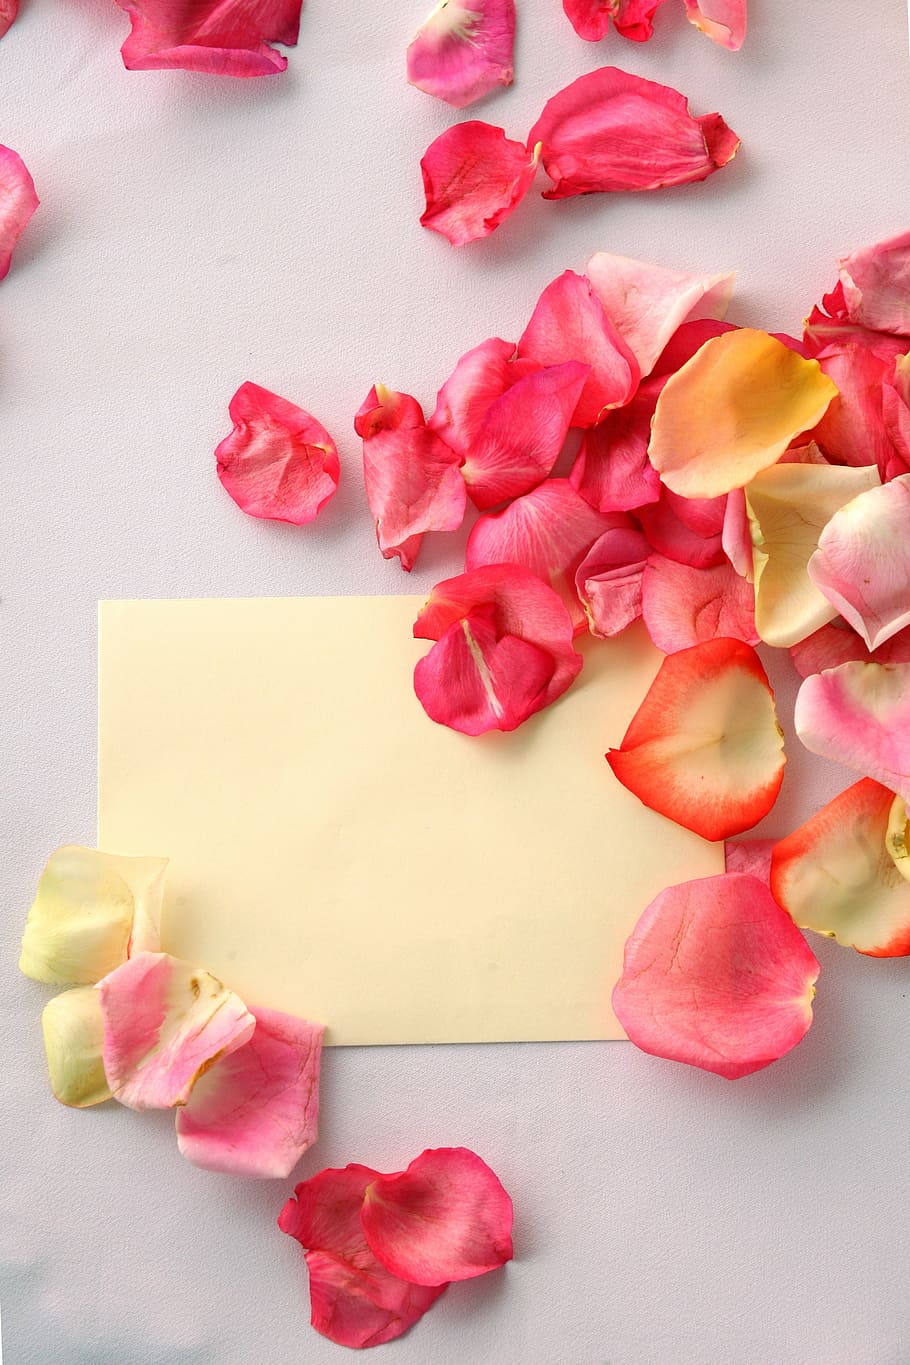 yellow, printing paper, surround, pink, flower petals, red, red roses, flowers, petal, rose - Flower